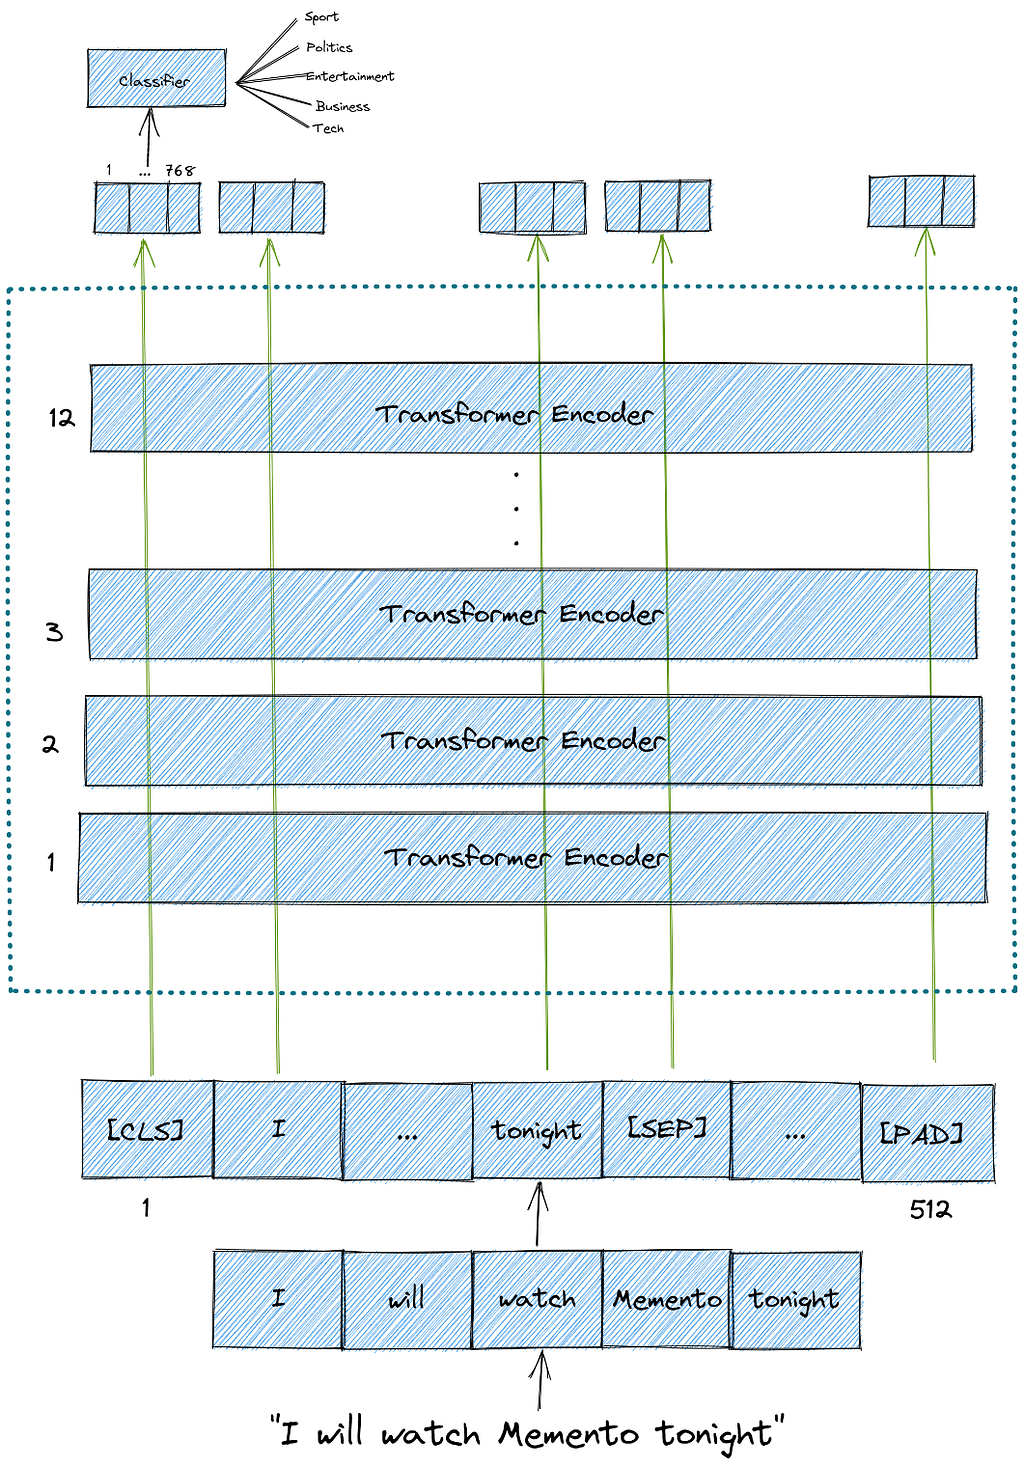 Simplified BERT architecture drawing for text classification